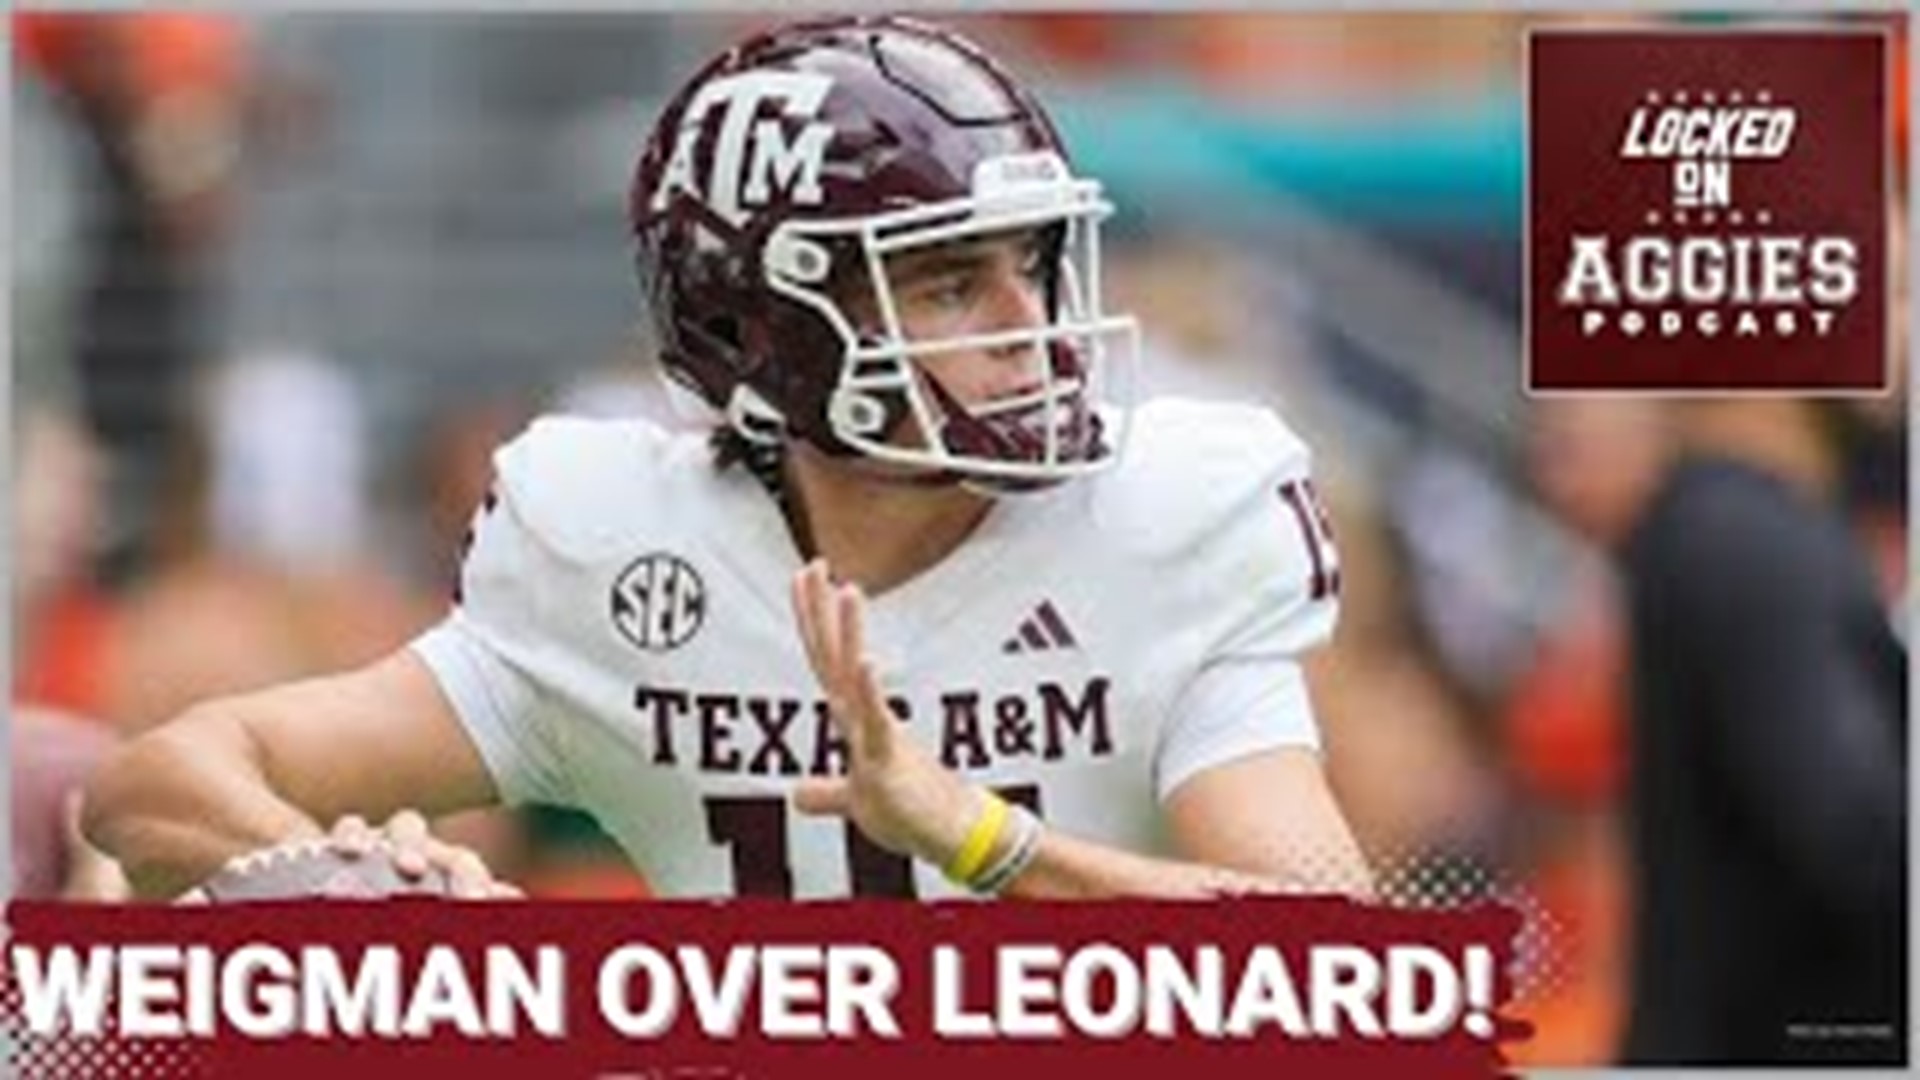 On today's episode of Locked On Aggies, host Andrew Stefaniak talks about how he would rather have Conner Weigman quarterback the Texas A&M Aggies.